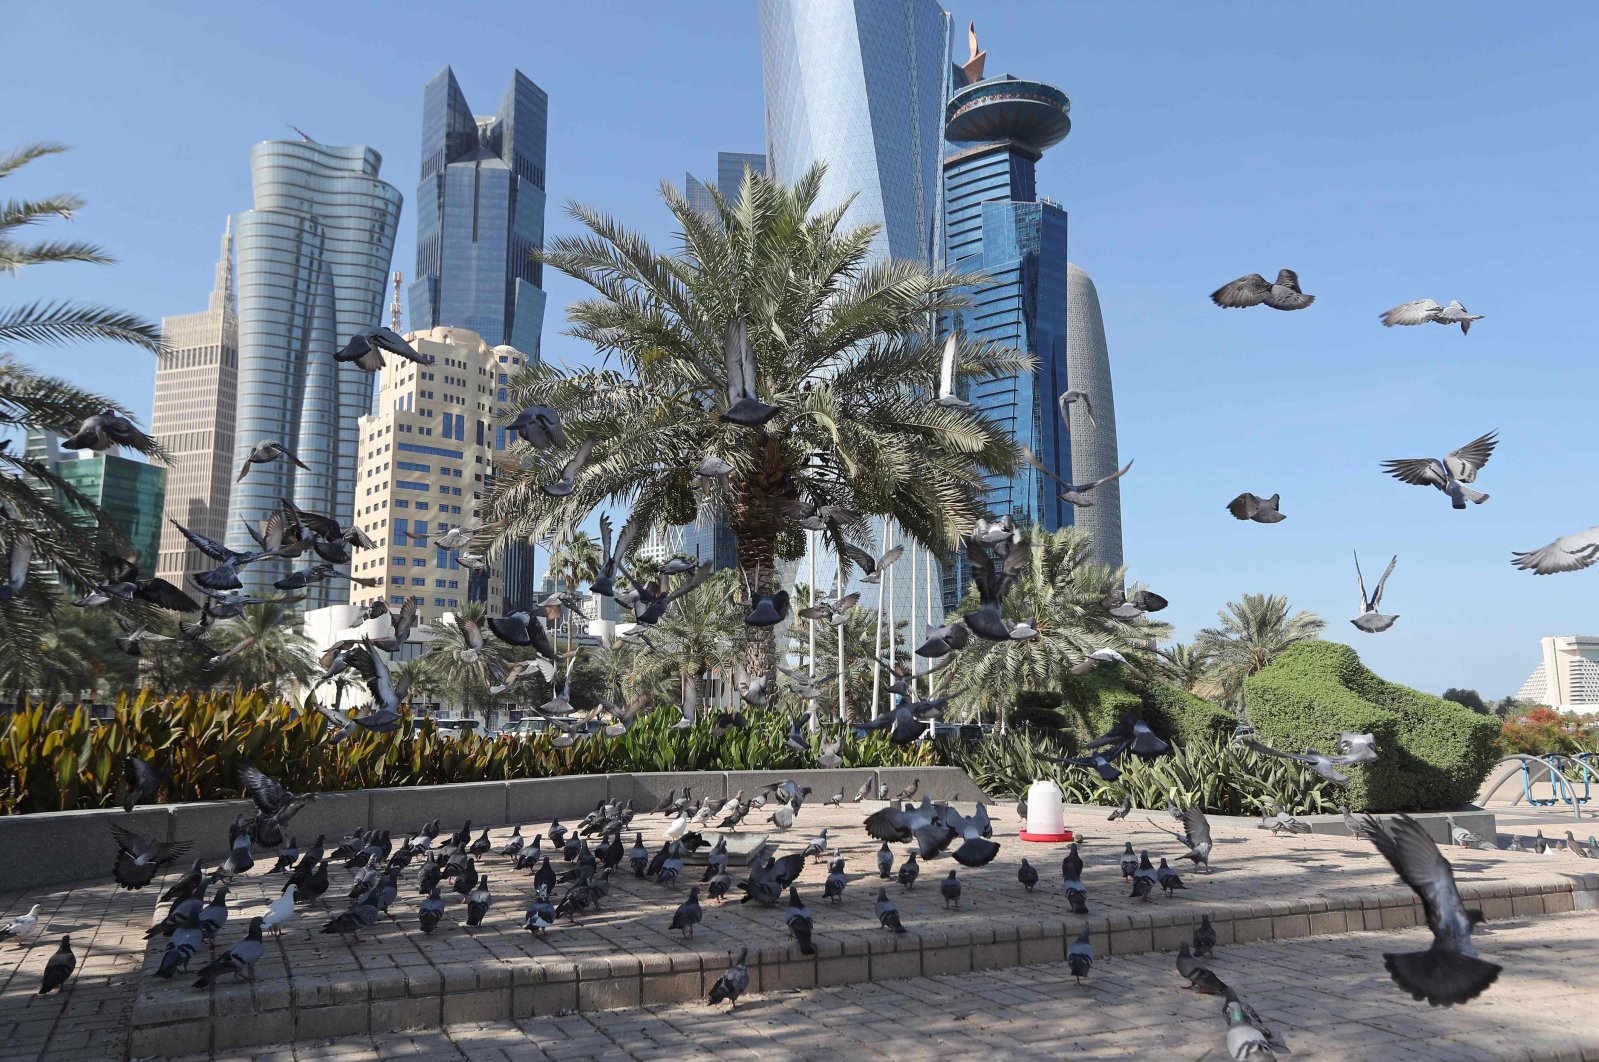 A general view shows pigeons flying above the Corniche in Doha, Qatar, June 5, 2017. (AFP Photo)